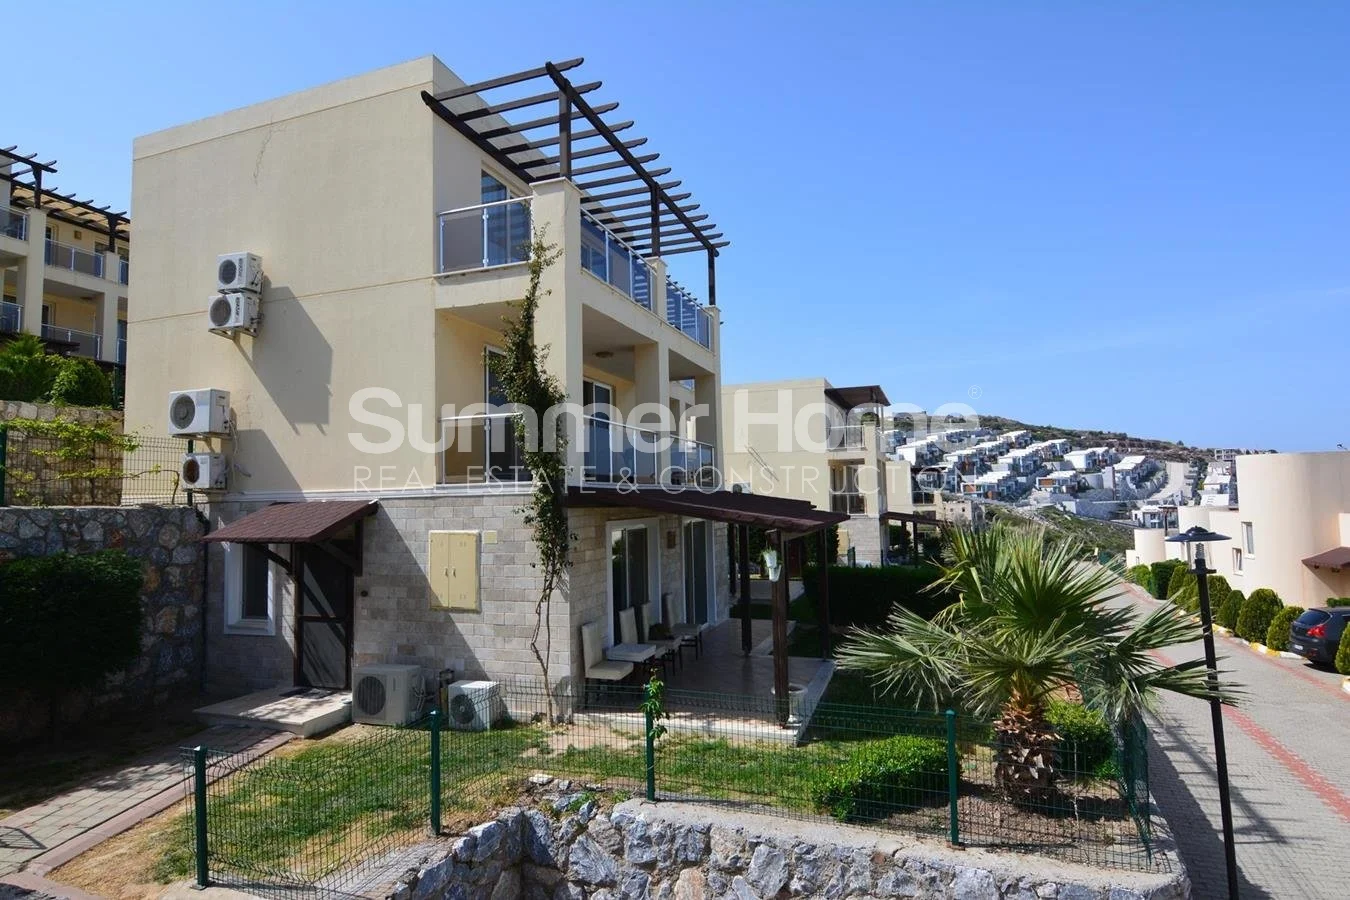 One-bedroom furnished apartment with sea view in Tuzla, Bodrum general - 2